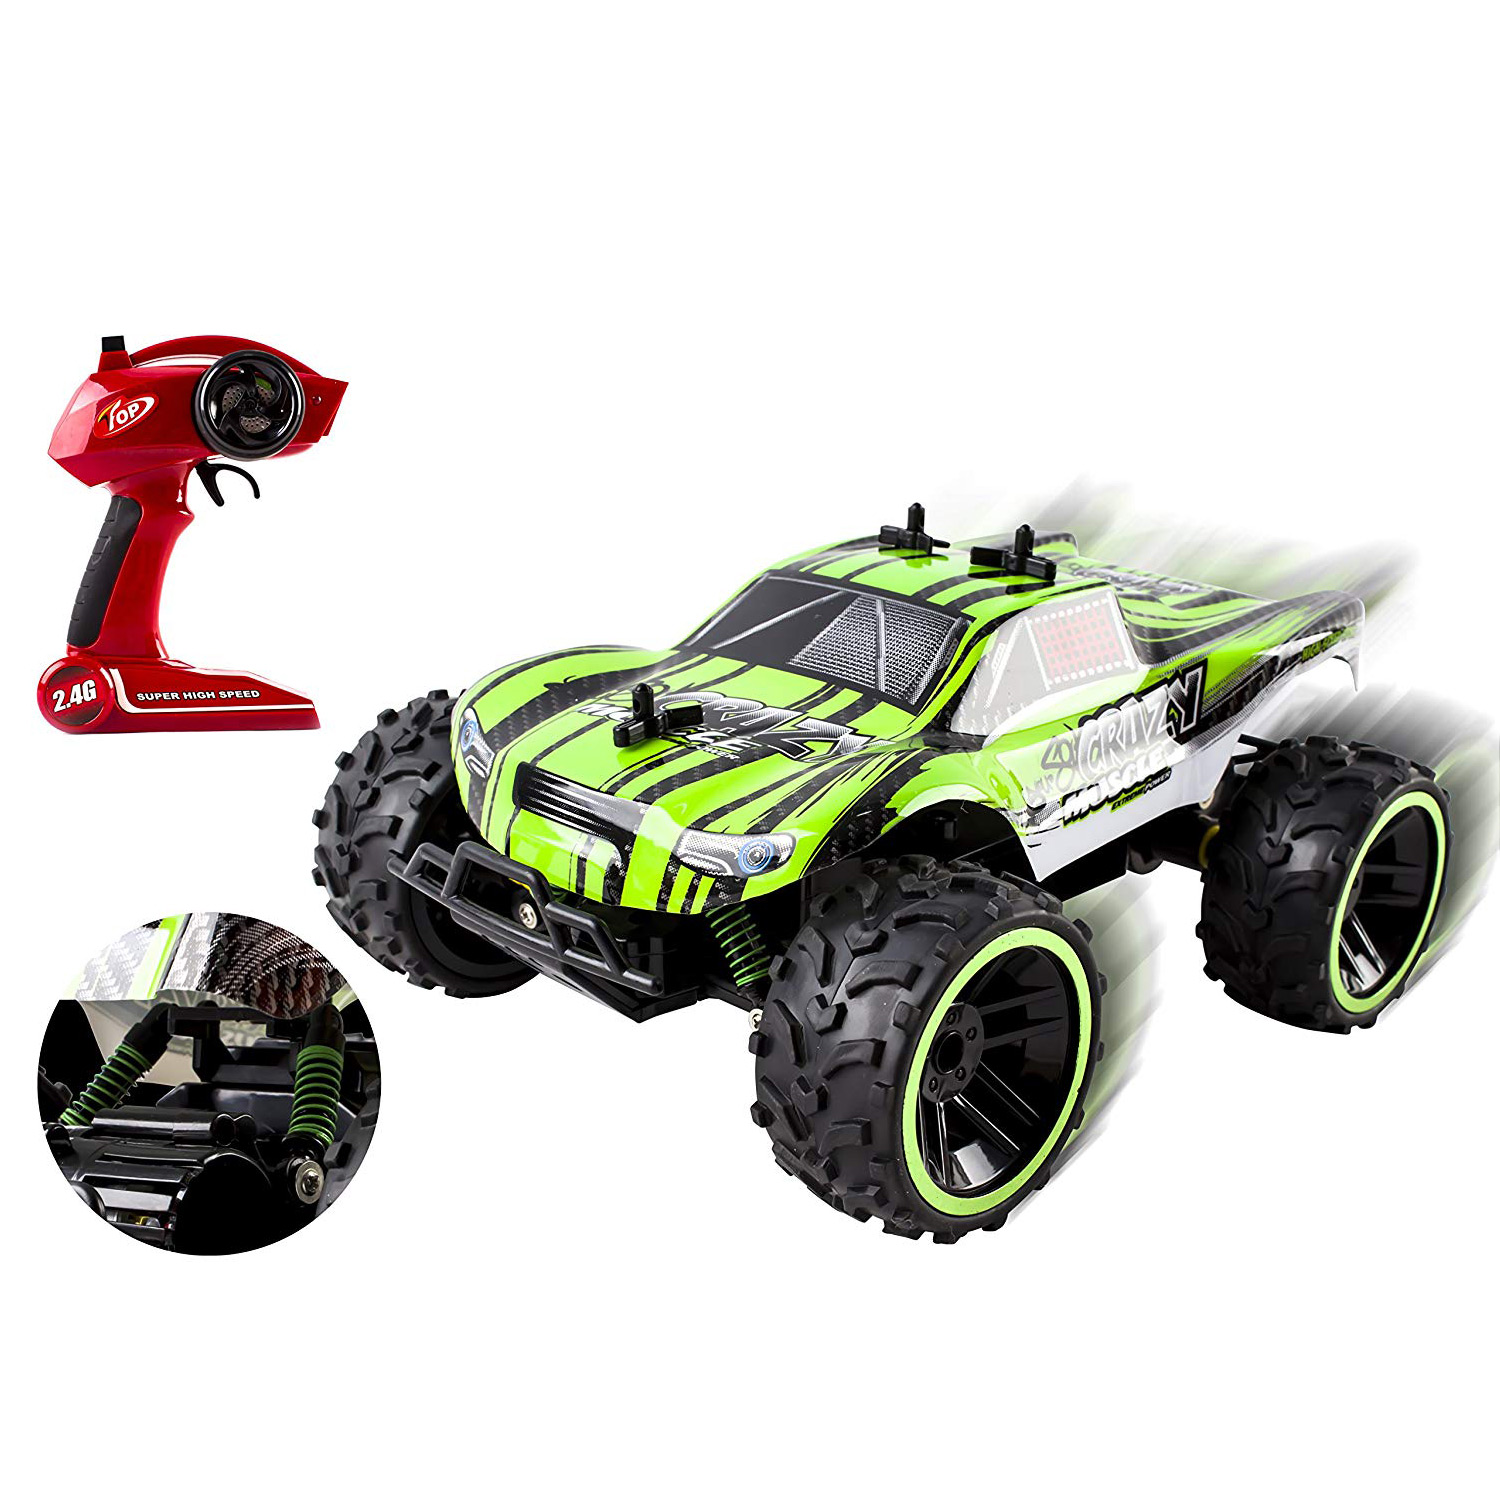 Speed Muscle RC Buggy 24Ghz 116 Scale Remote Control Truggy Ready to Run With Working Suspension And Spring Shock Absorbers for Indoor Outdoor And Off-Road Use Strong Build Toy Green QY1805A